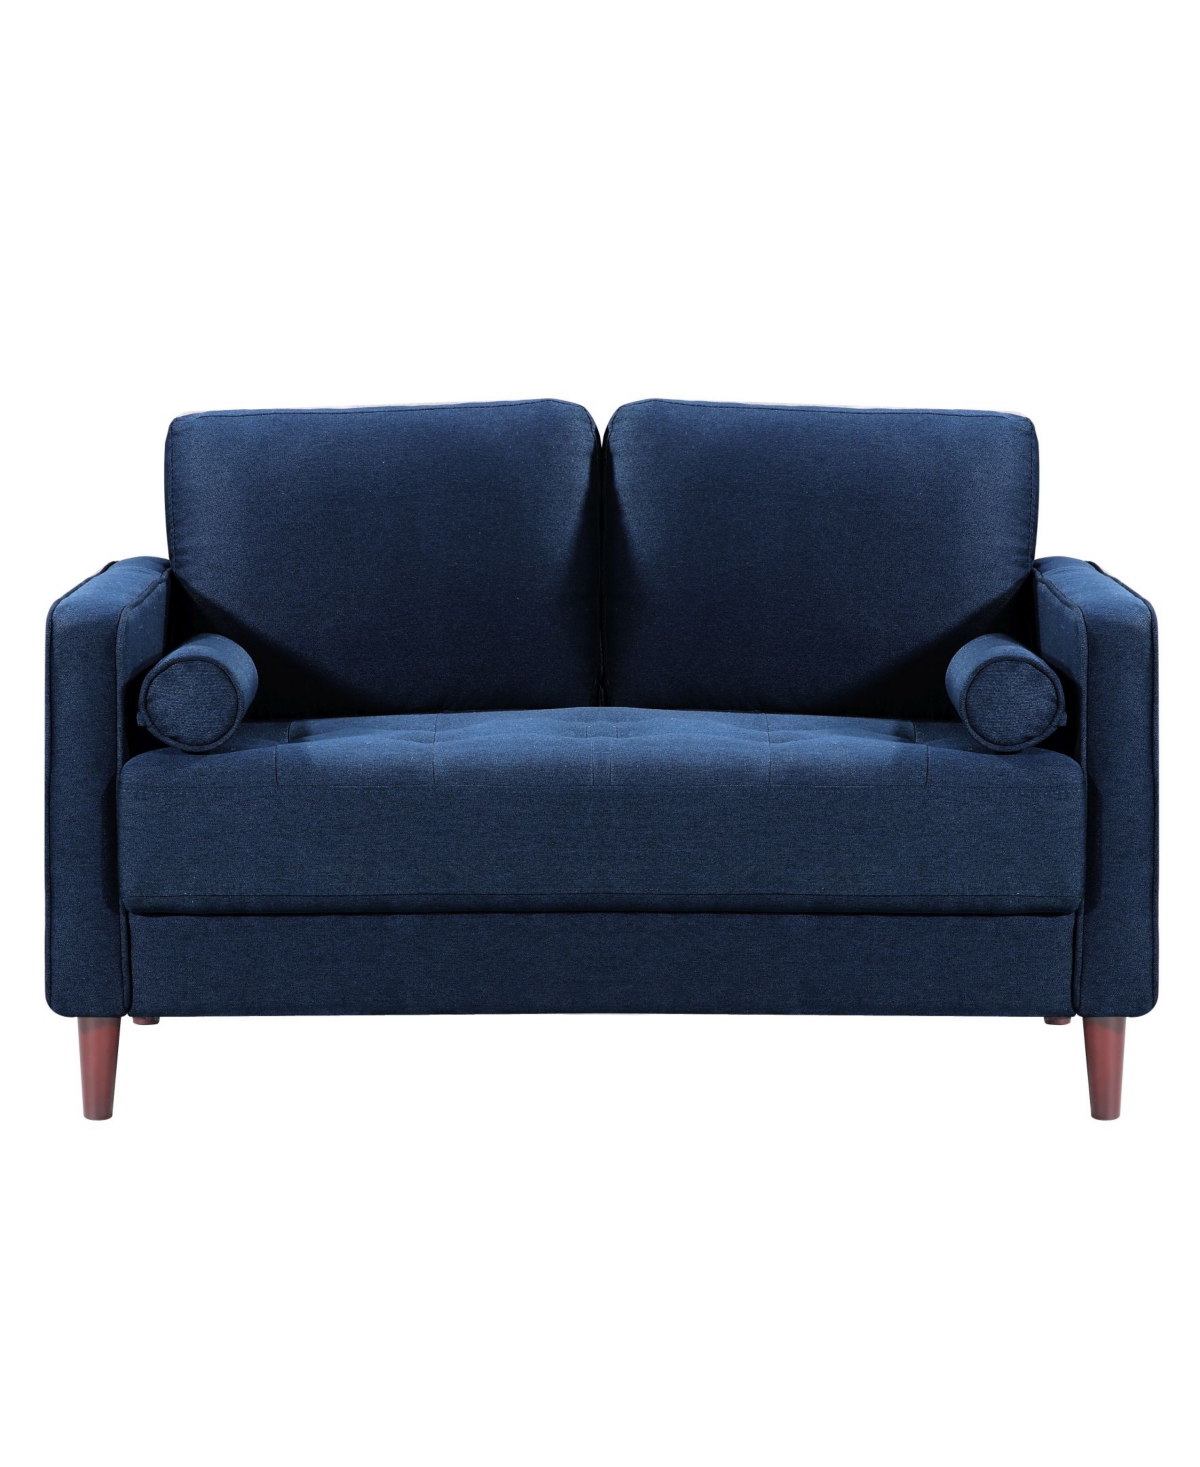 Lifestyle Solutions Lillith Modern Loveseat With Upholstered Fabric And Wooden Frame